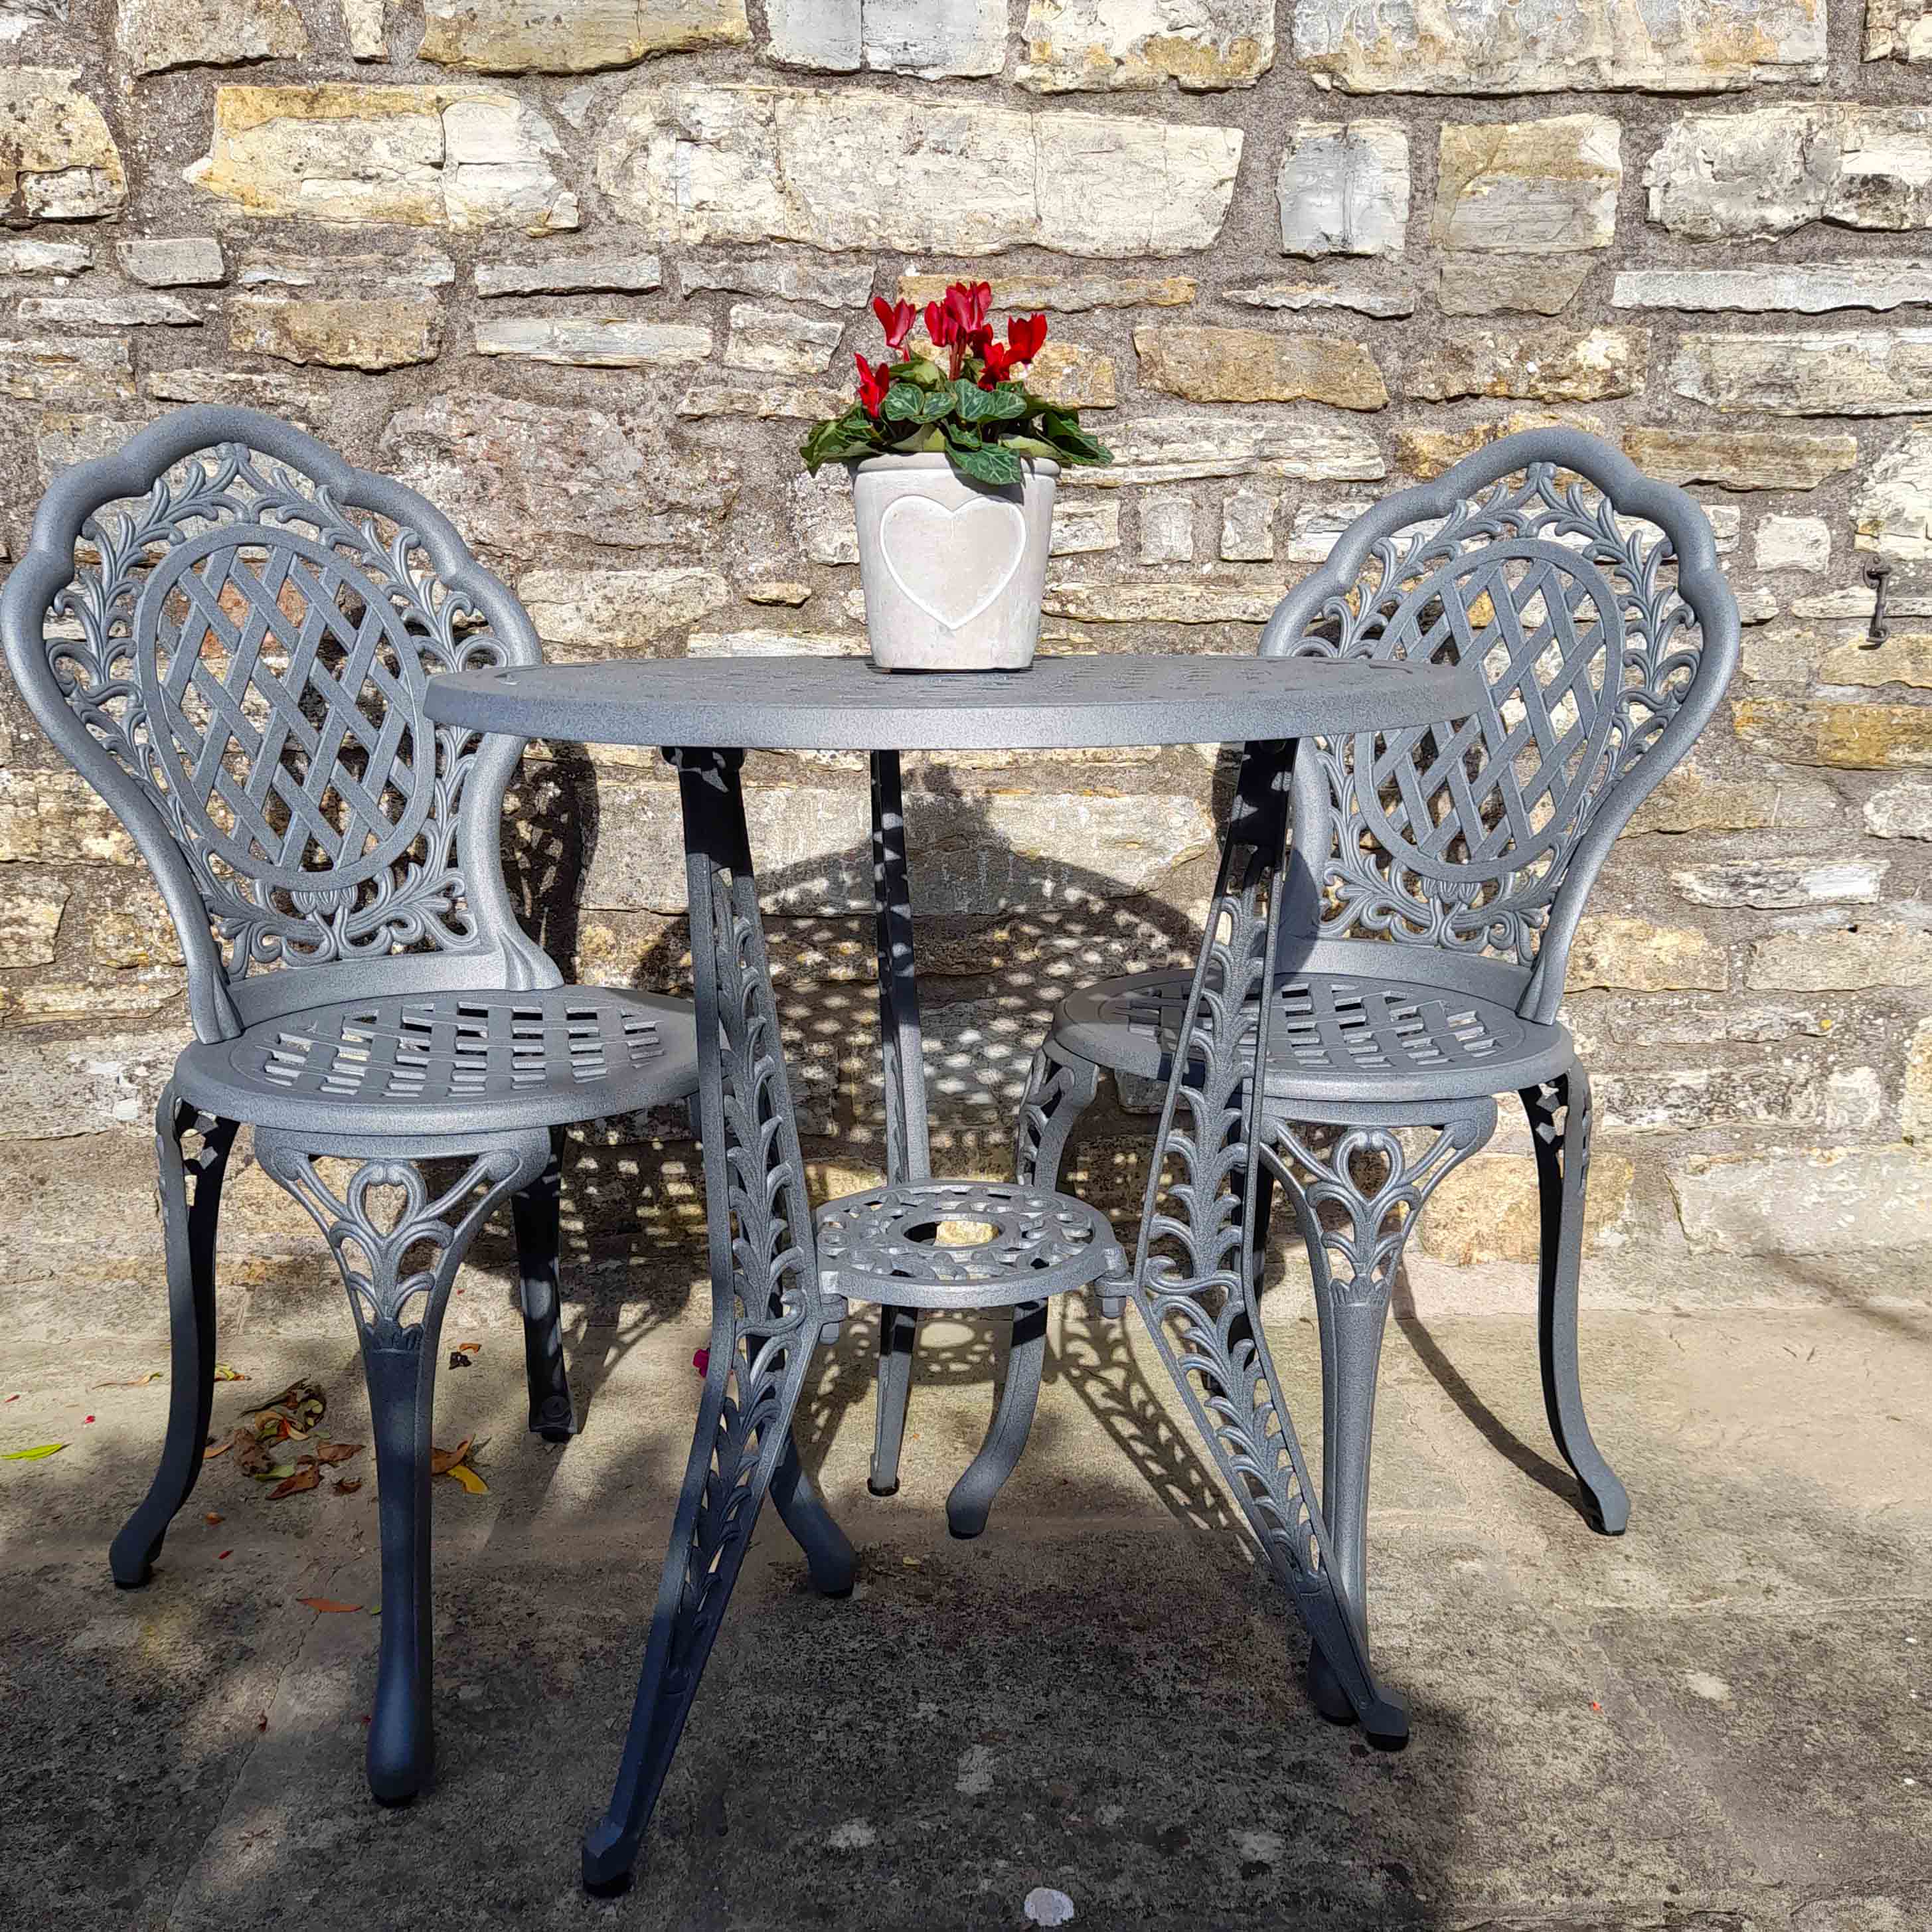 Our Ivy small garden chairs and table are low maintenance